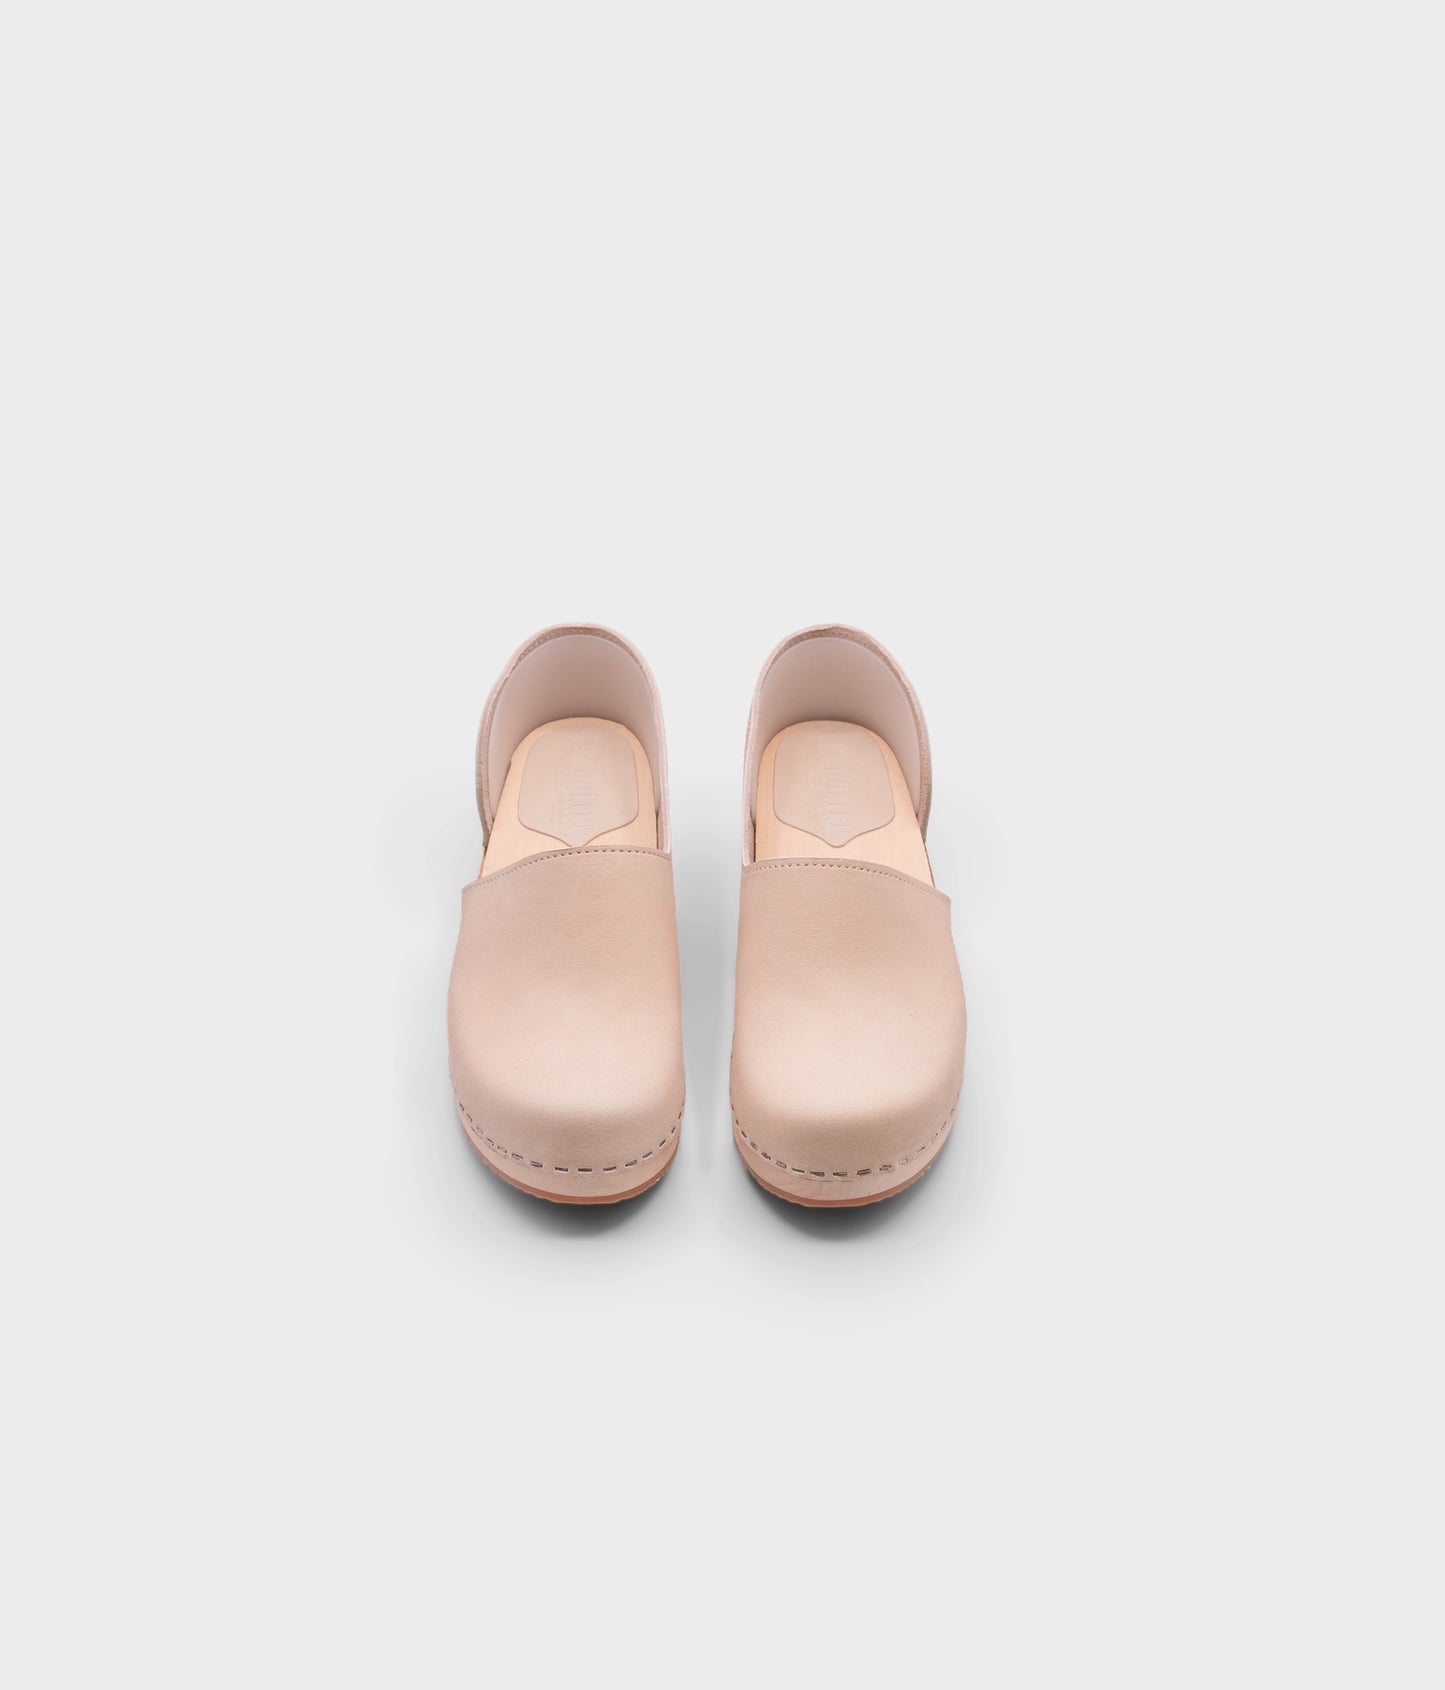 low heeled closed-back clogs in sand white nubuck leather stapled on a light wooden base